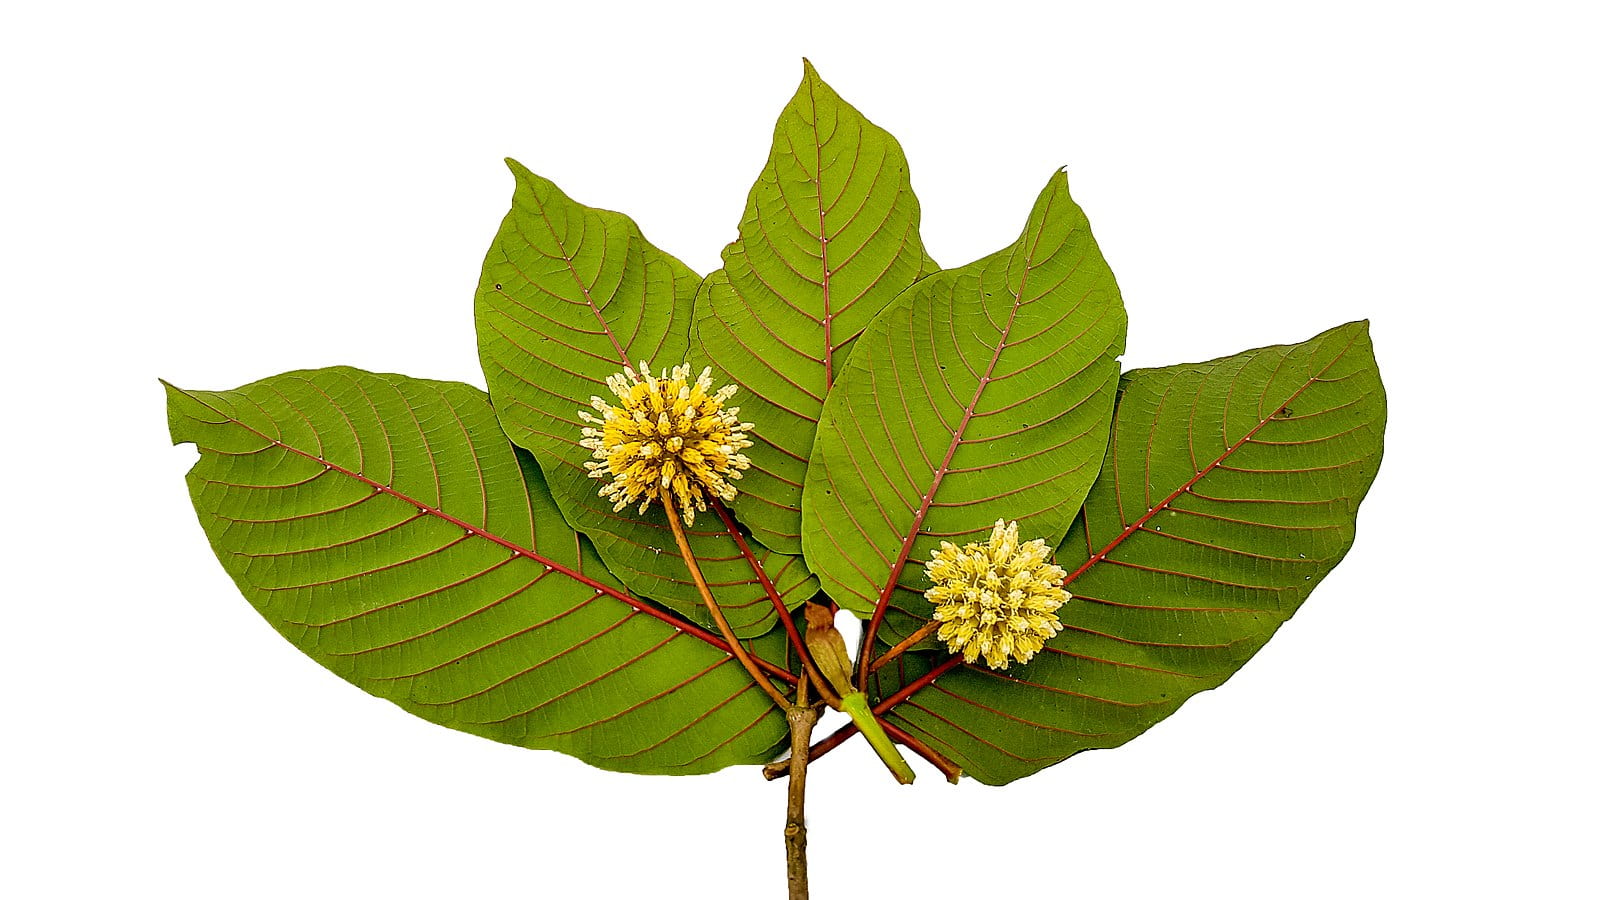 [Image showing the large, broad, green leaves of the mitragyna speciosa (kratom) plant.]